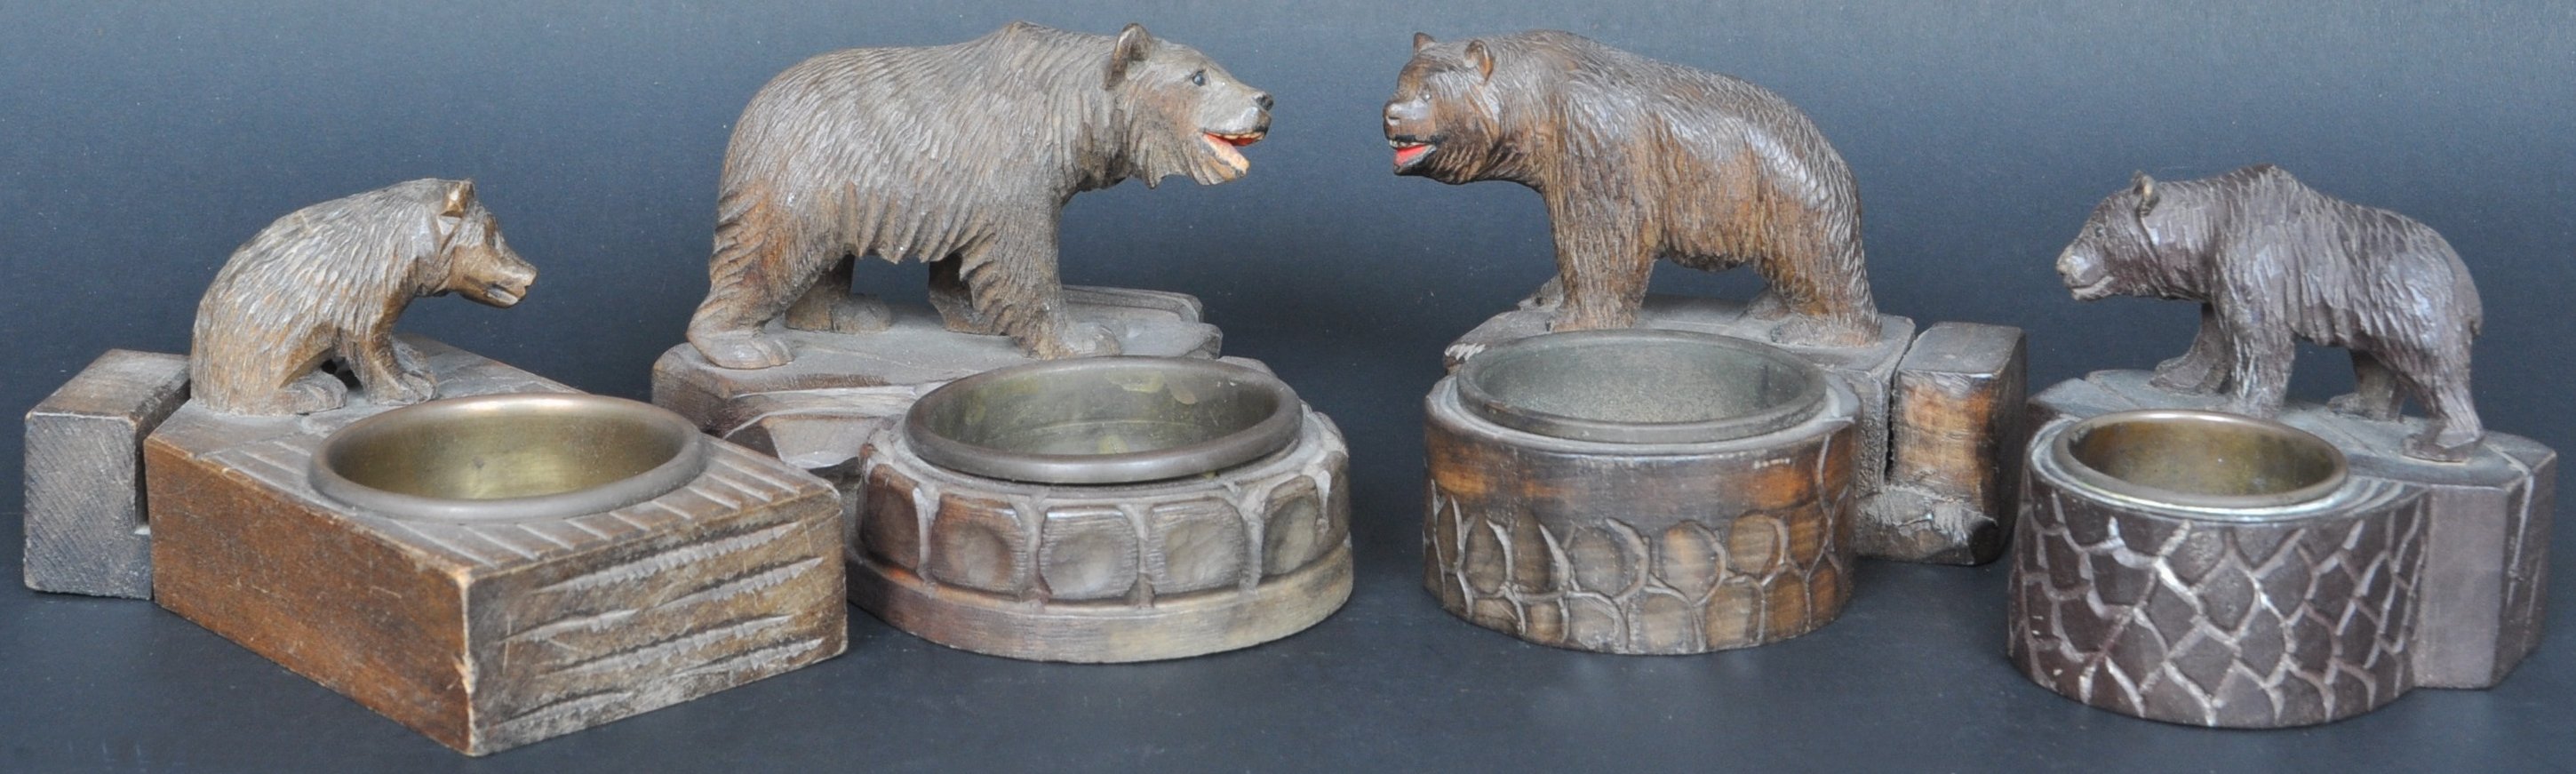 COLLECTION OF 19TH CENTURY HAND CARVED BLACK FOREST BEAR ITEMS